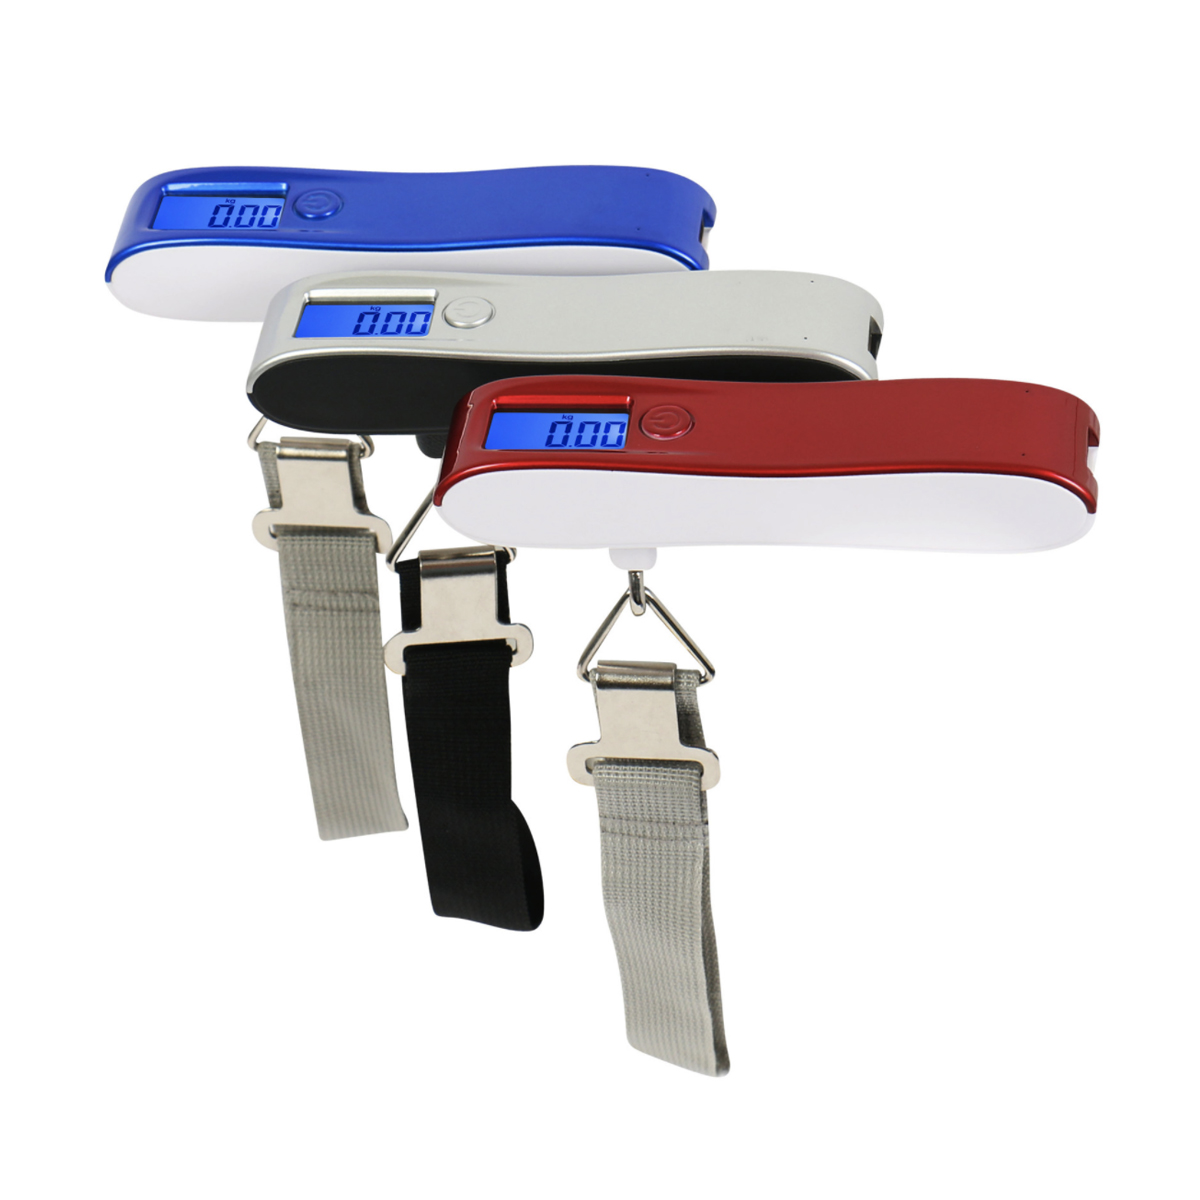 2 in 1 Luggage Weighing Scale